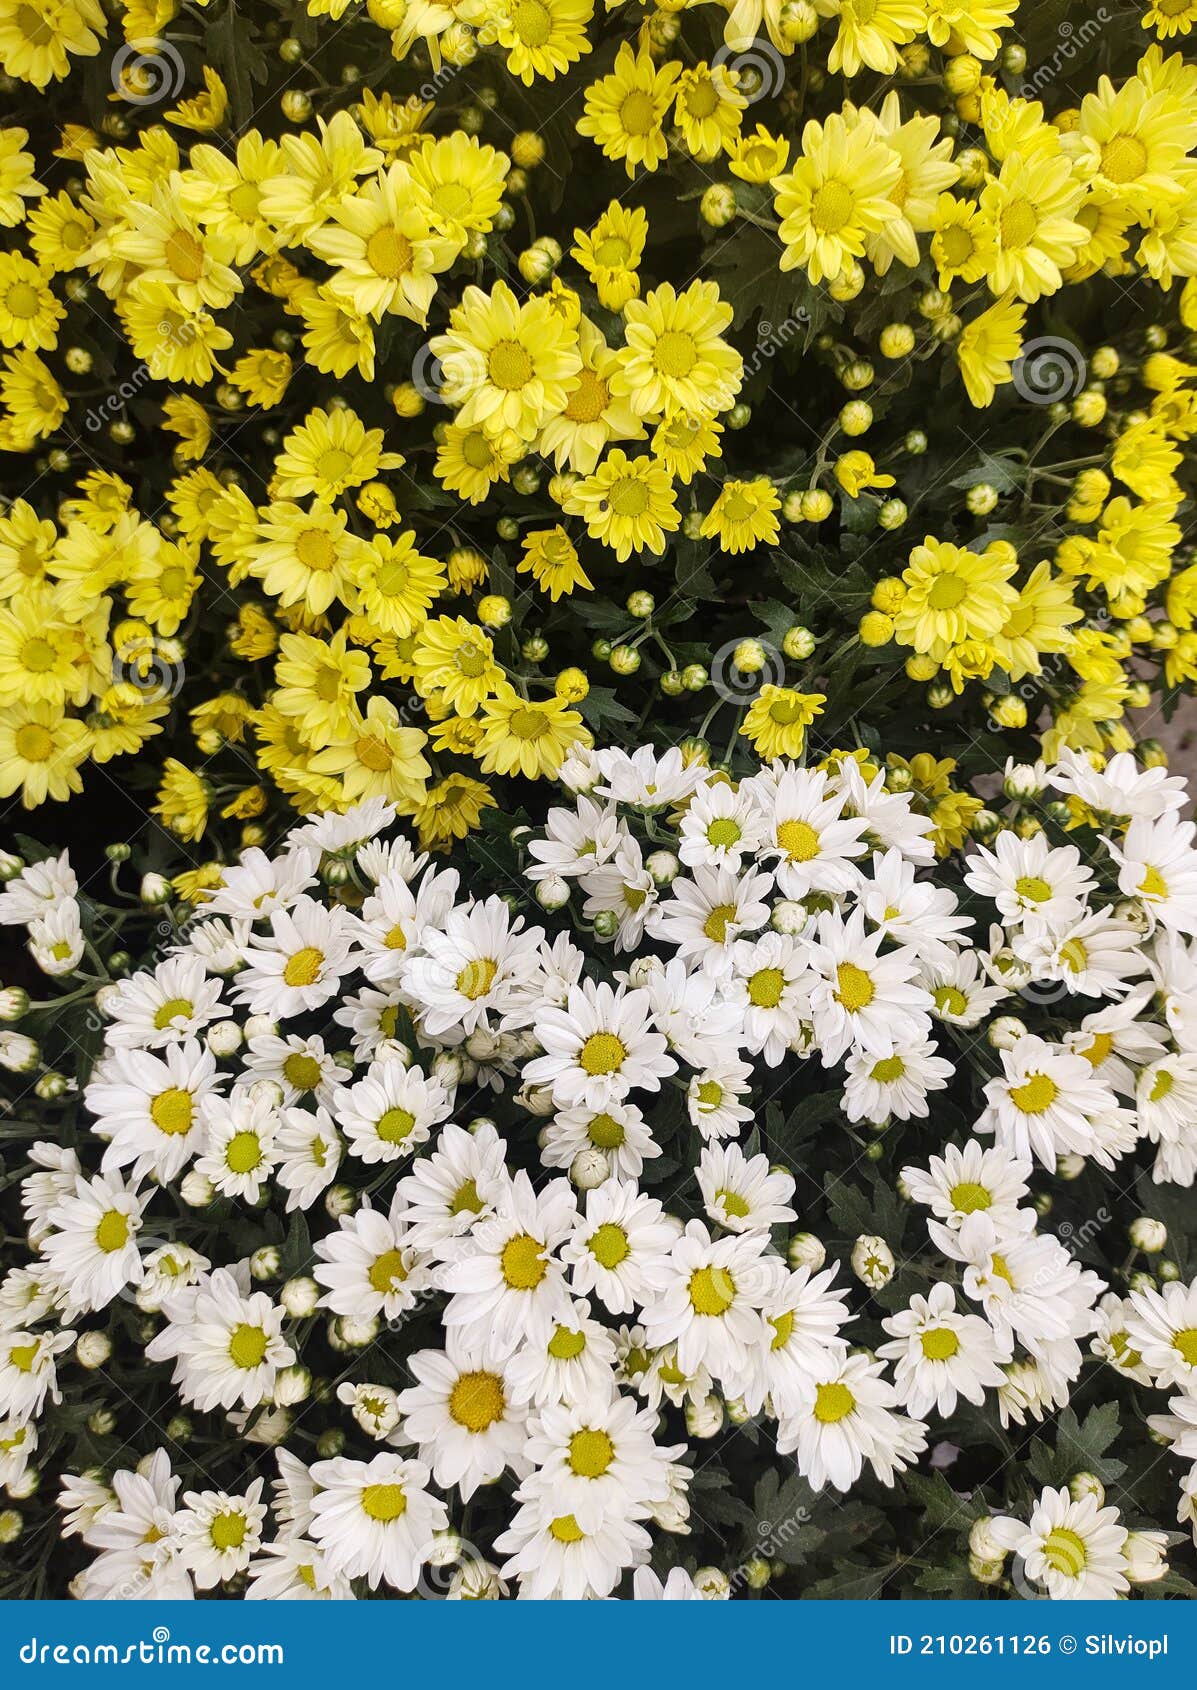 flower bed with yellow and white chrysanthemums half and half.